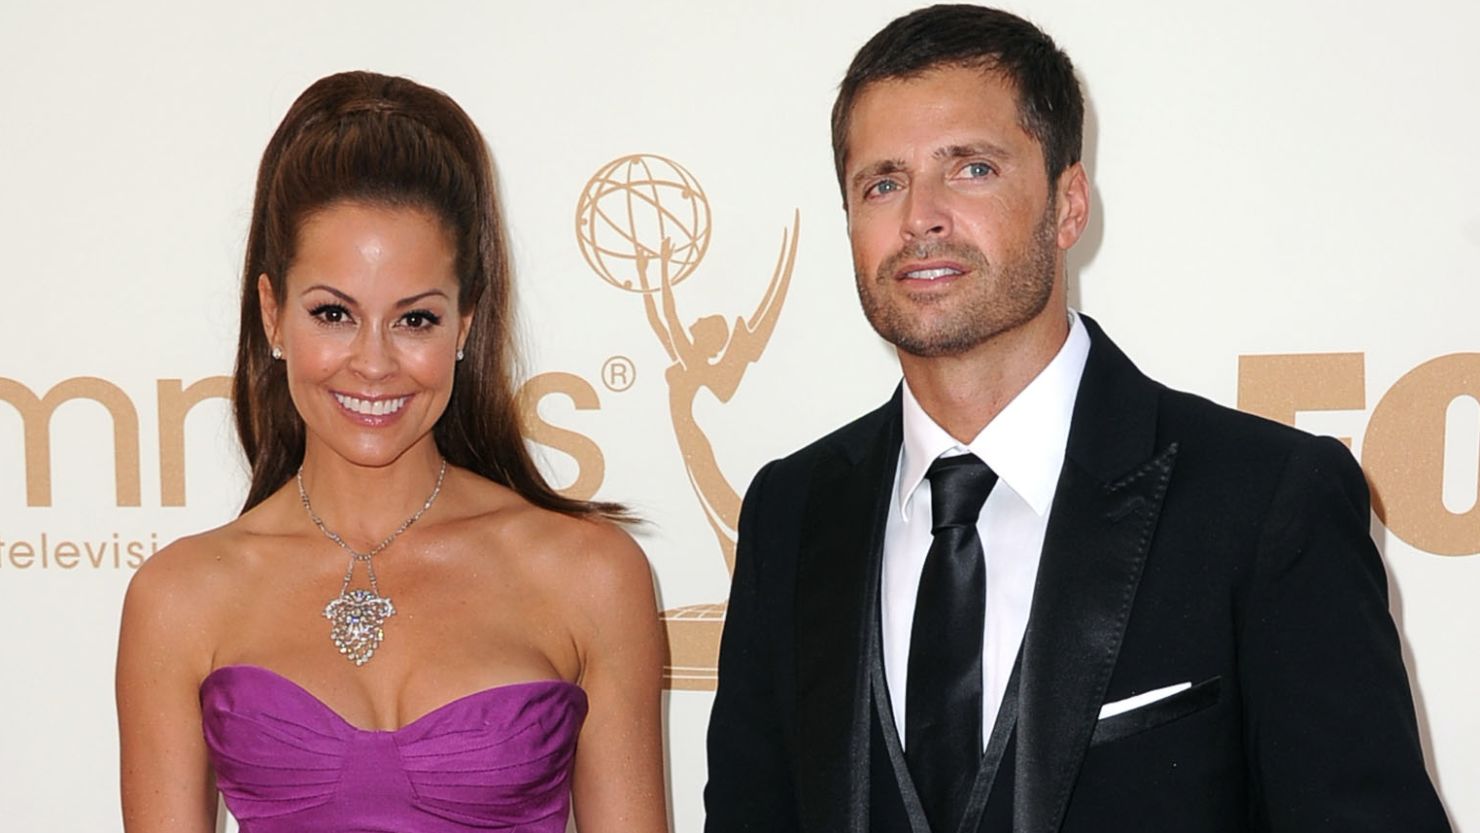 "It was a very selfish, but meaningful moment," Brooke Burke said of her secret nuptials.